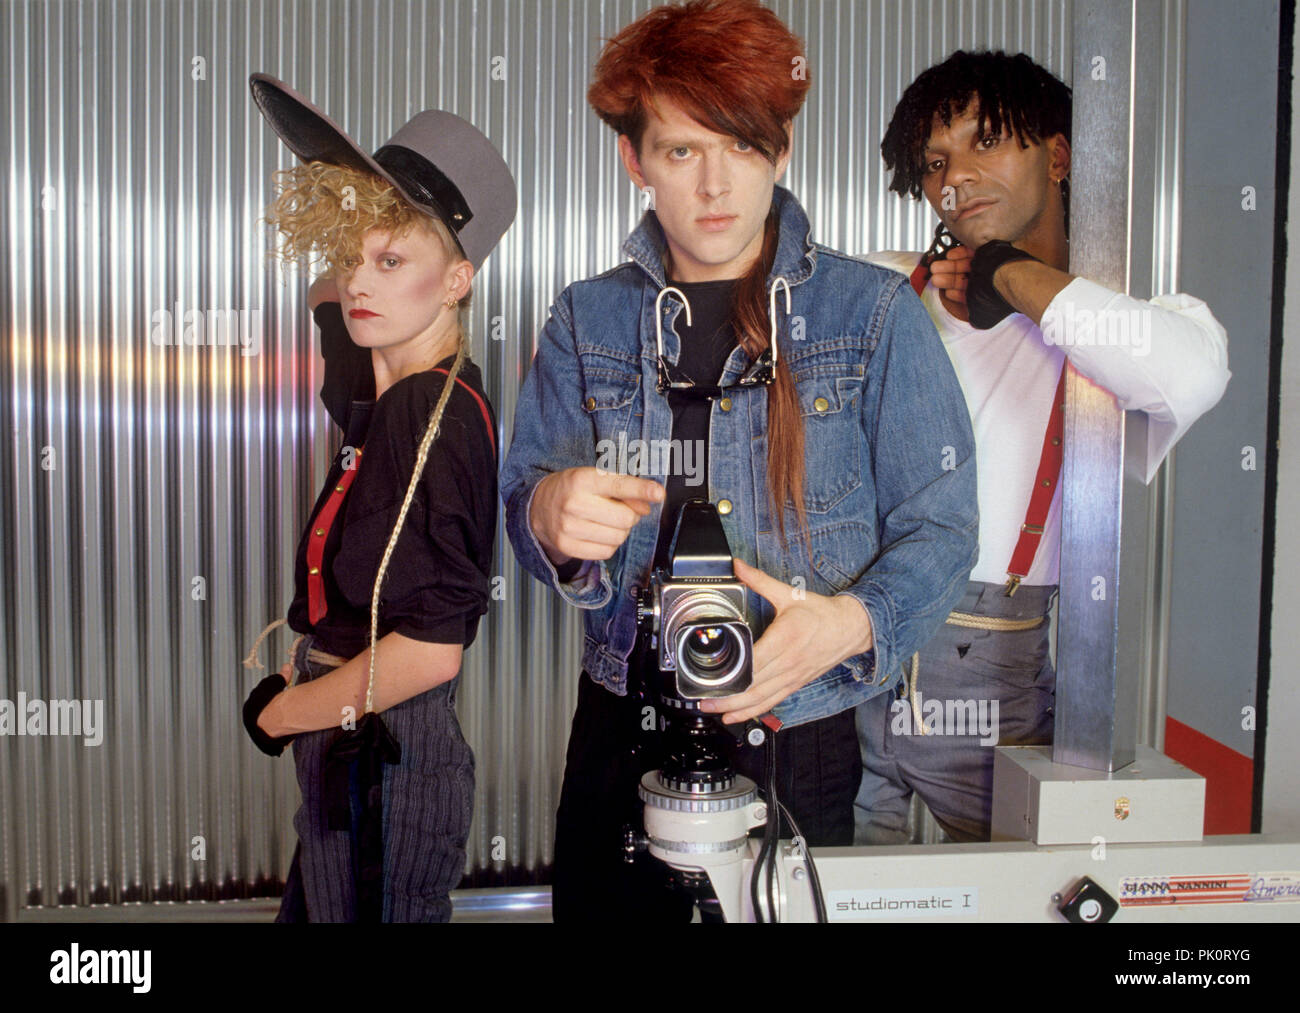 Thompson Twins (singer Tom Bailey) on 07.10.1985 in Lippstadt